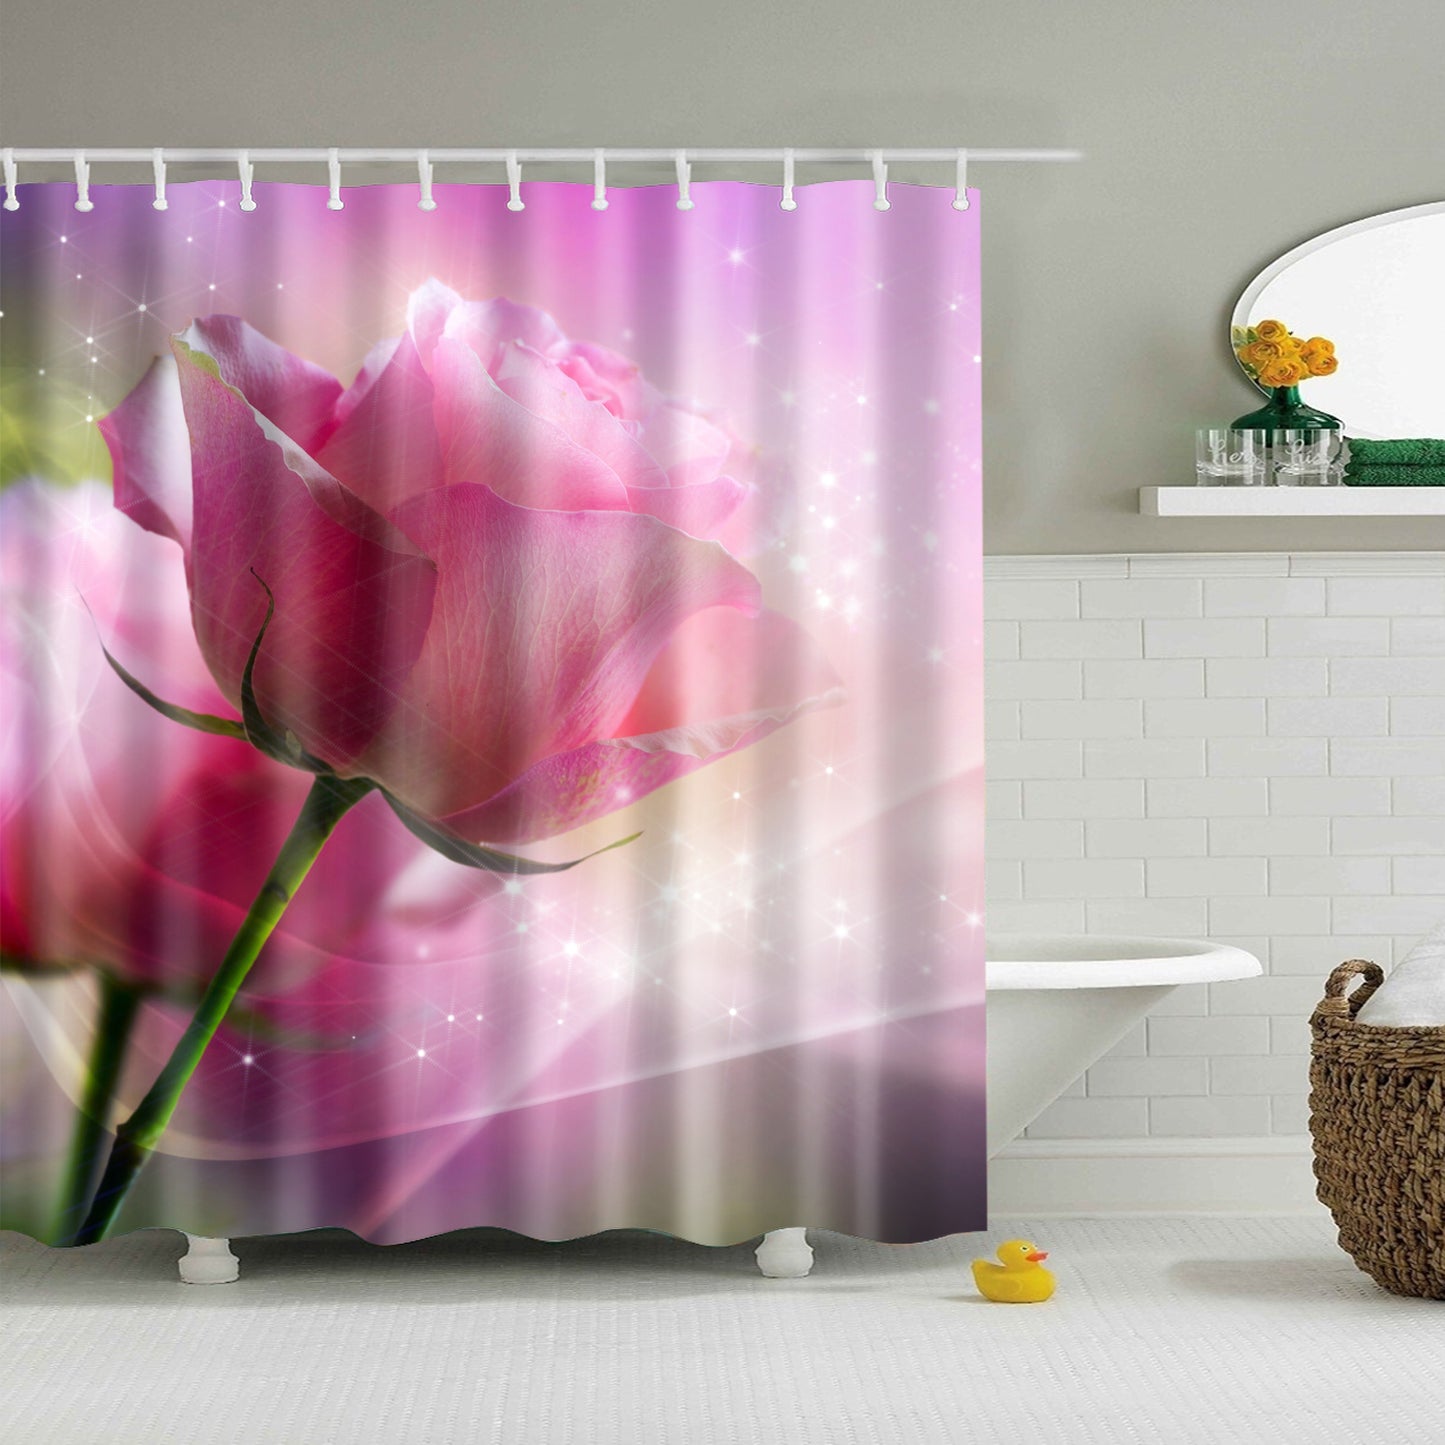 Natural Pink Roses Shower Curtain